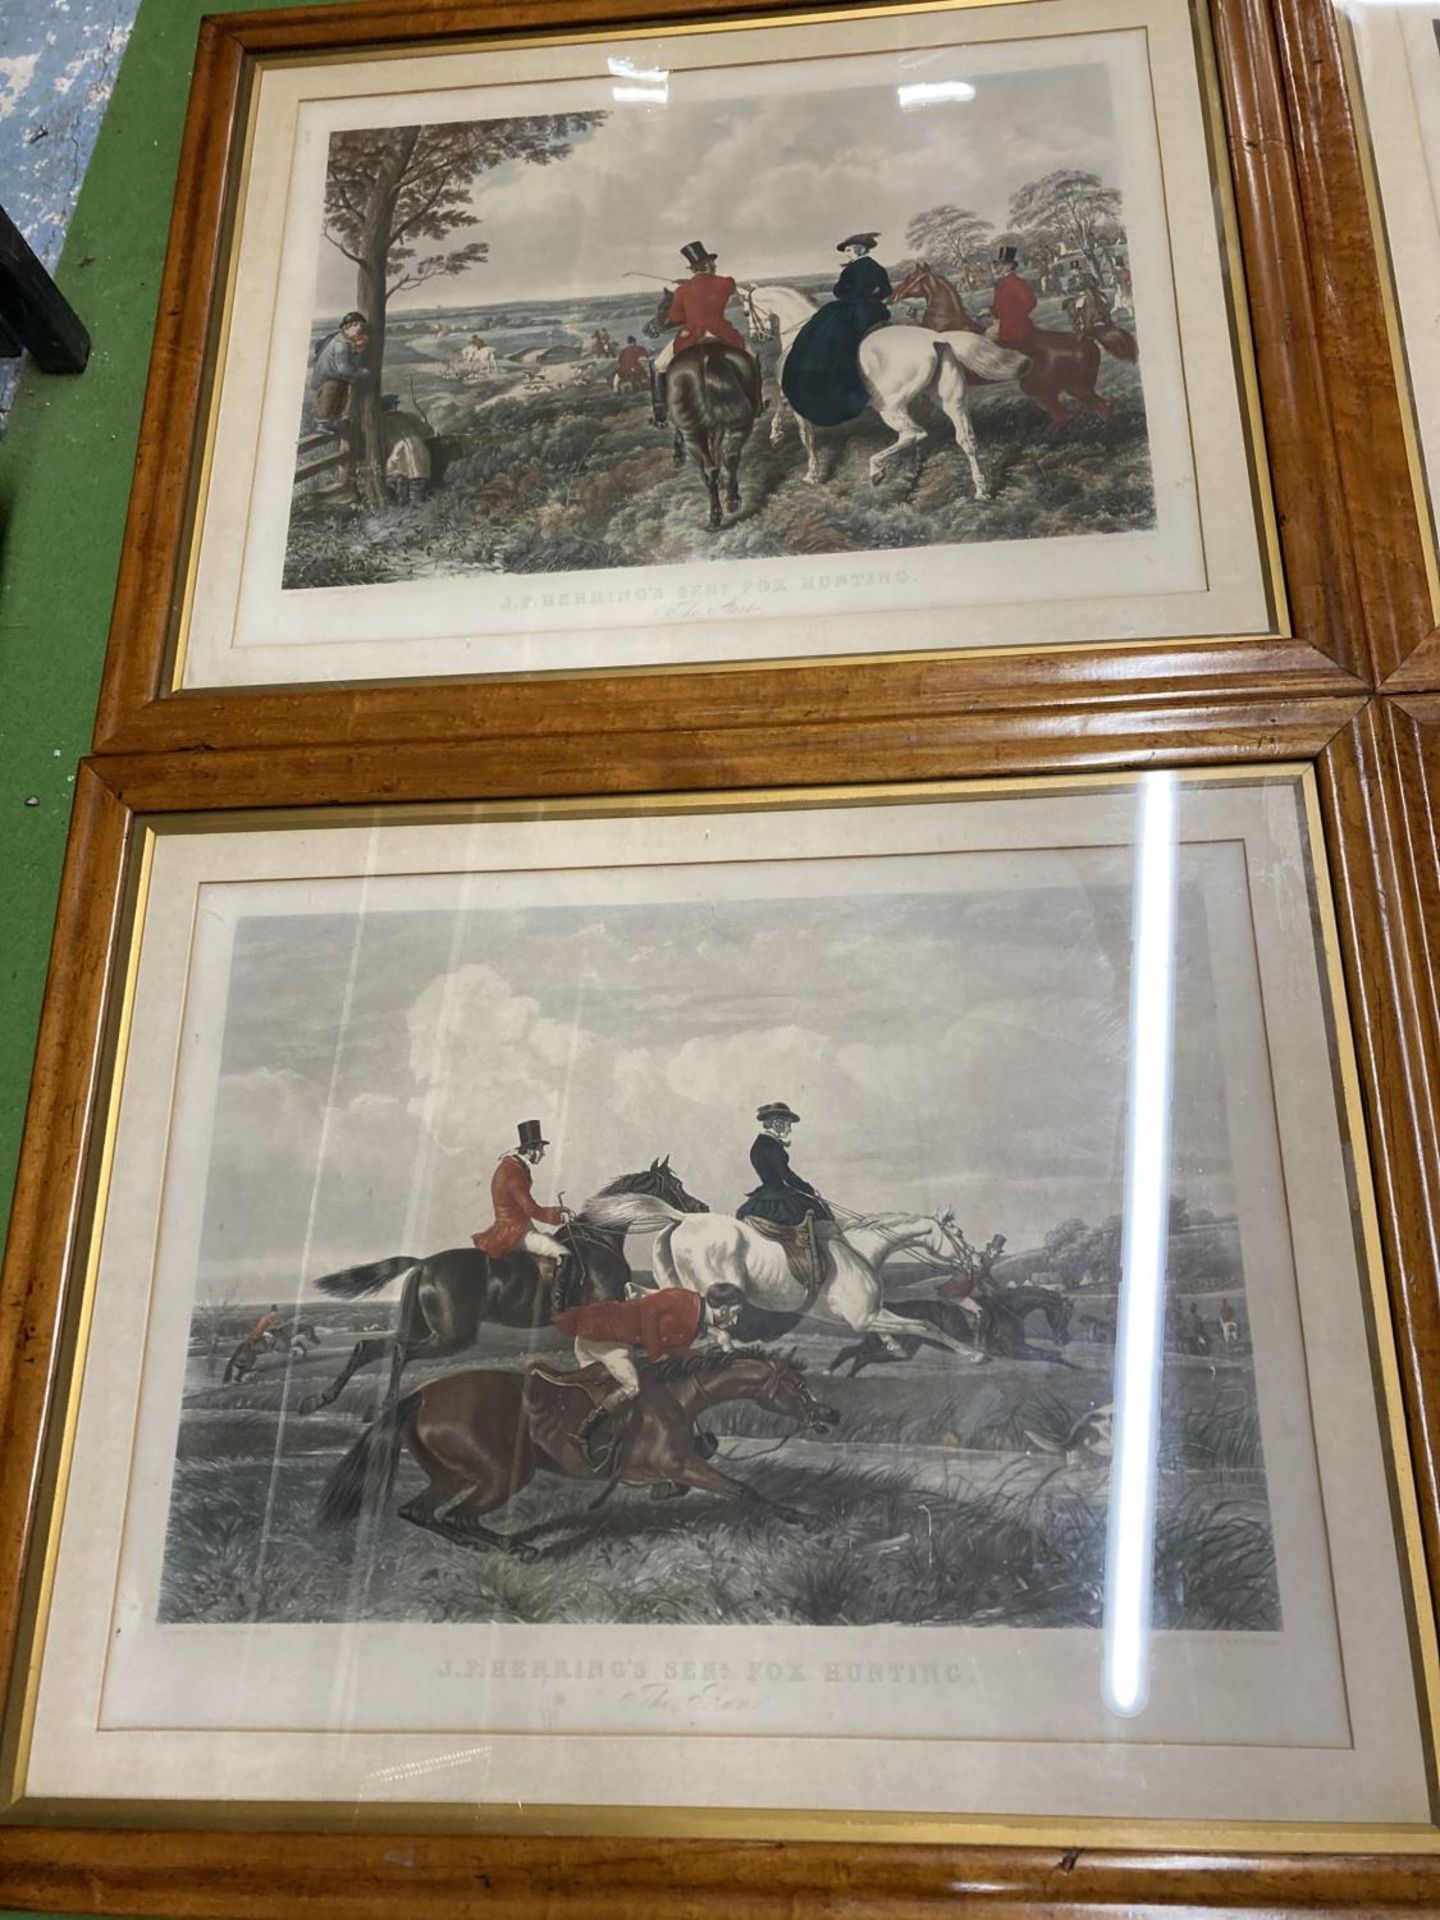 A SET OF FOUR WALNUT FRAMED HUNTING ENGRAVINGS BY J.P HERRING AND ENGRAVED BY J.HARRIS & C. QUENTERY - Image 2 of 3